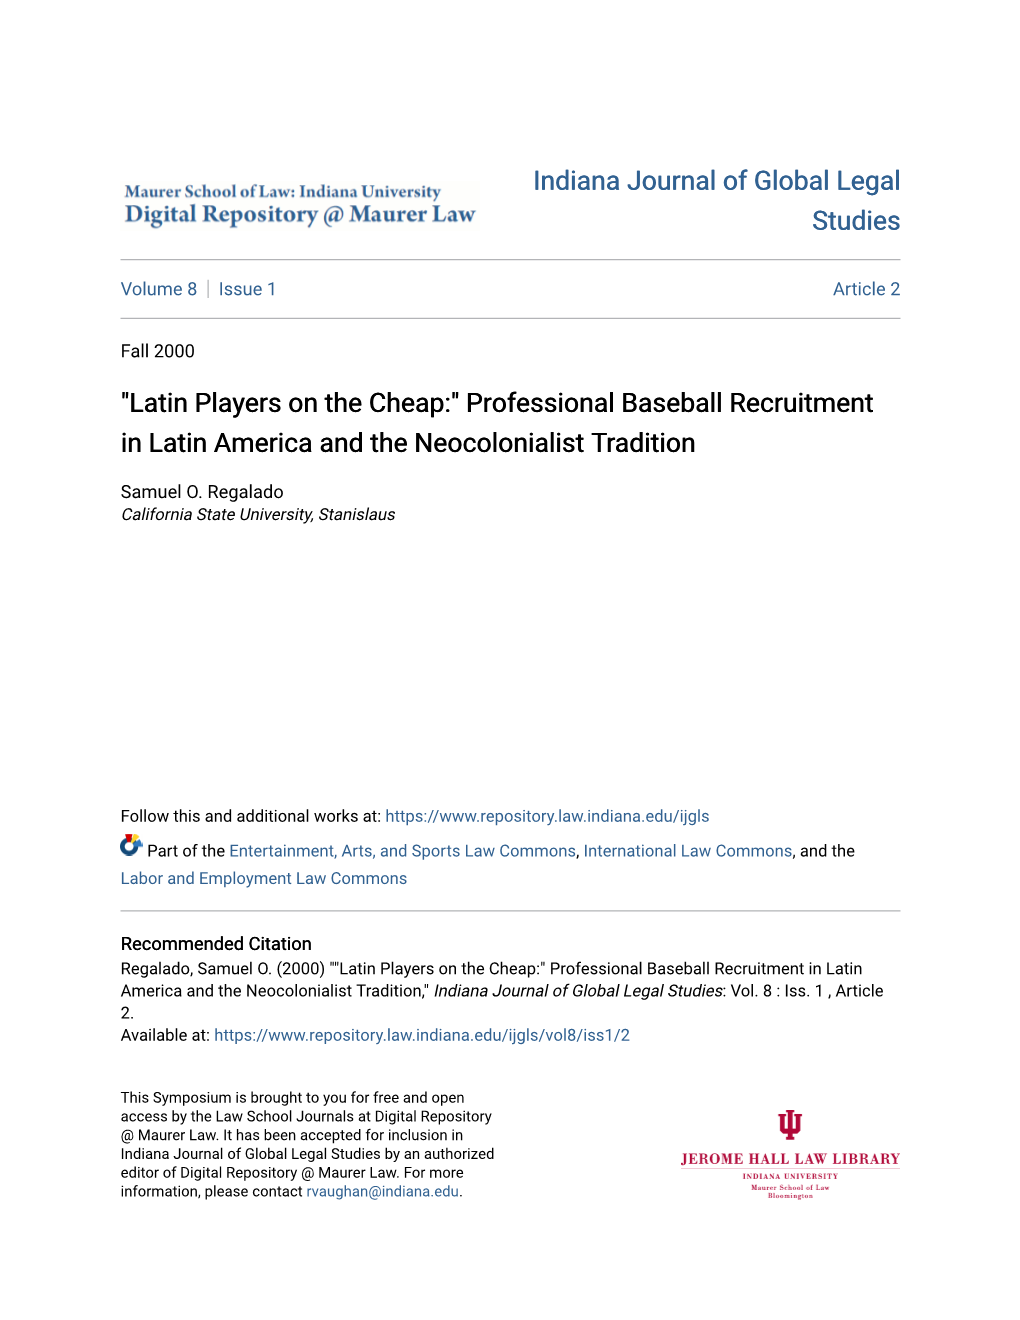 Professional Baseball Recruitment in Latin America and the Neocolonialist Tradition